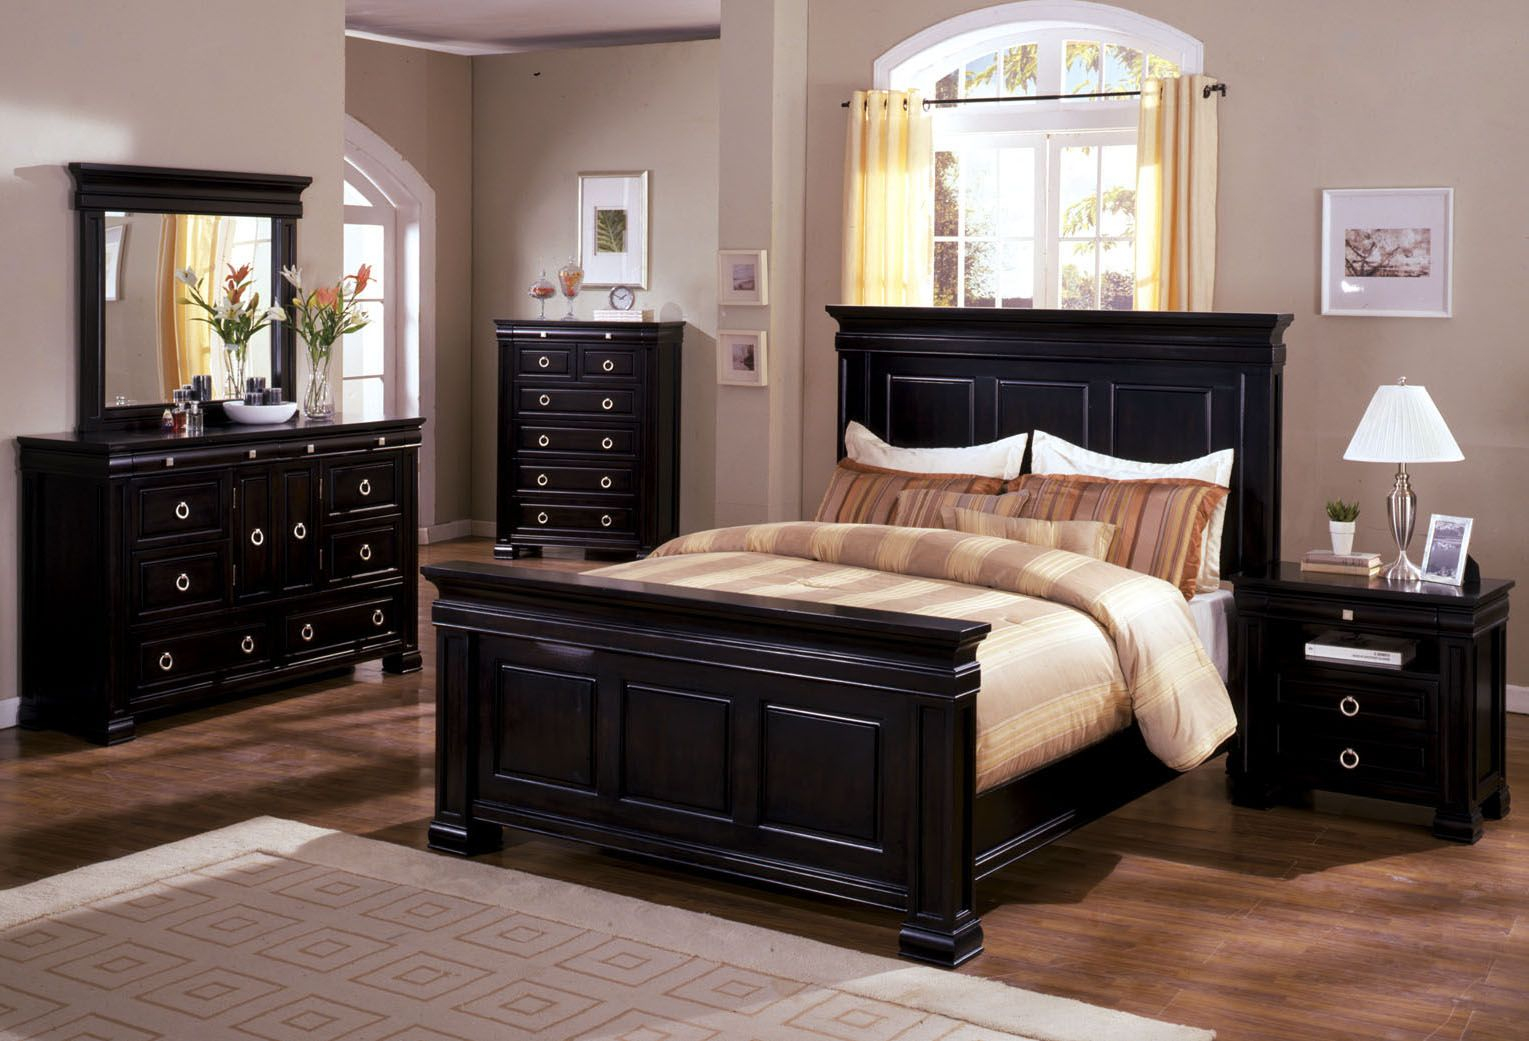 Affordable Bedroom Sets King With Excellent Finish Home Design Studio intended for dimensions 1529 X 1041